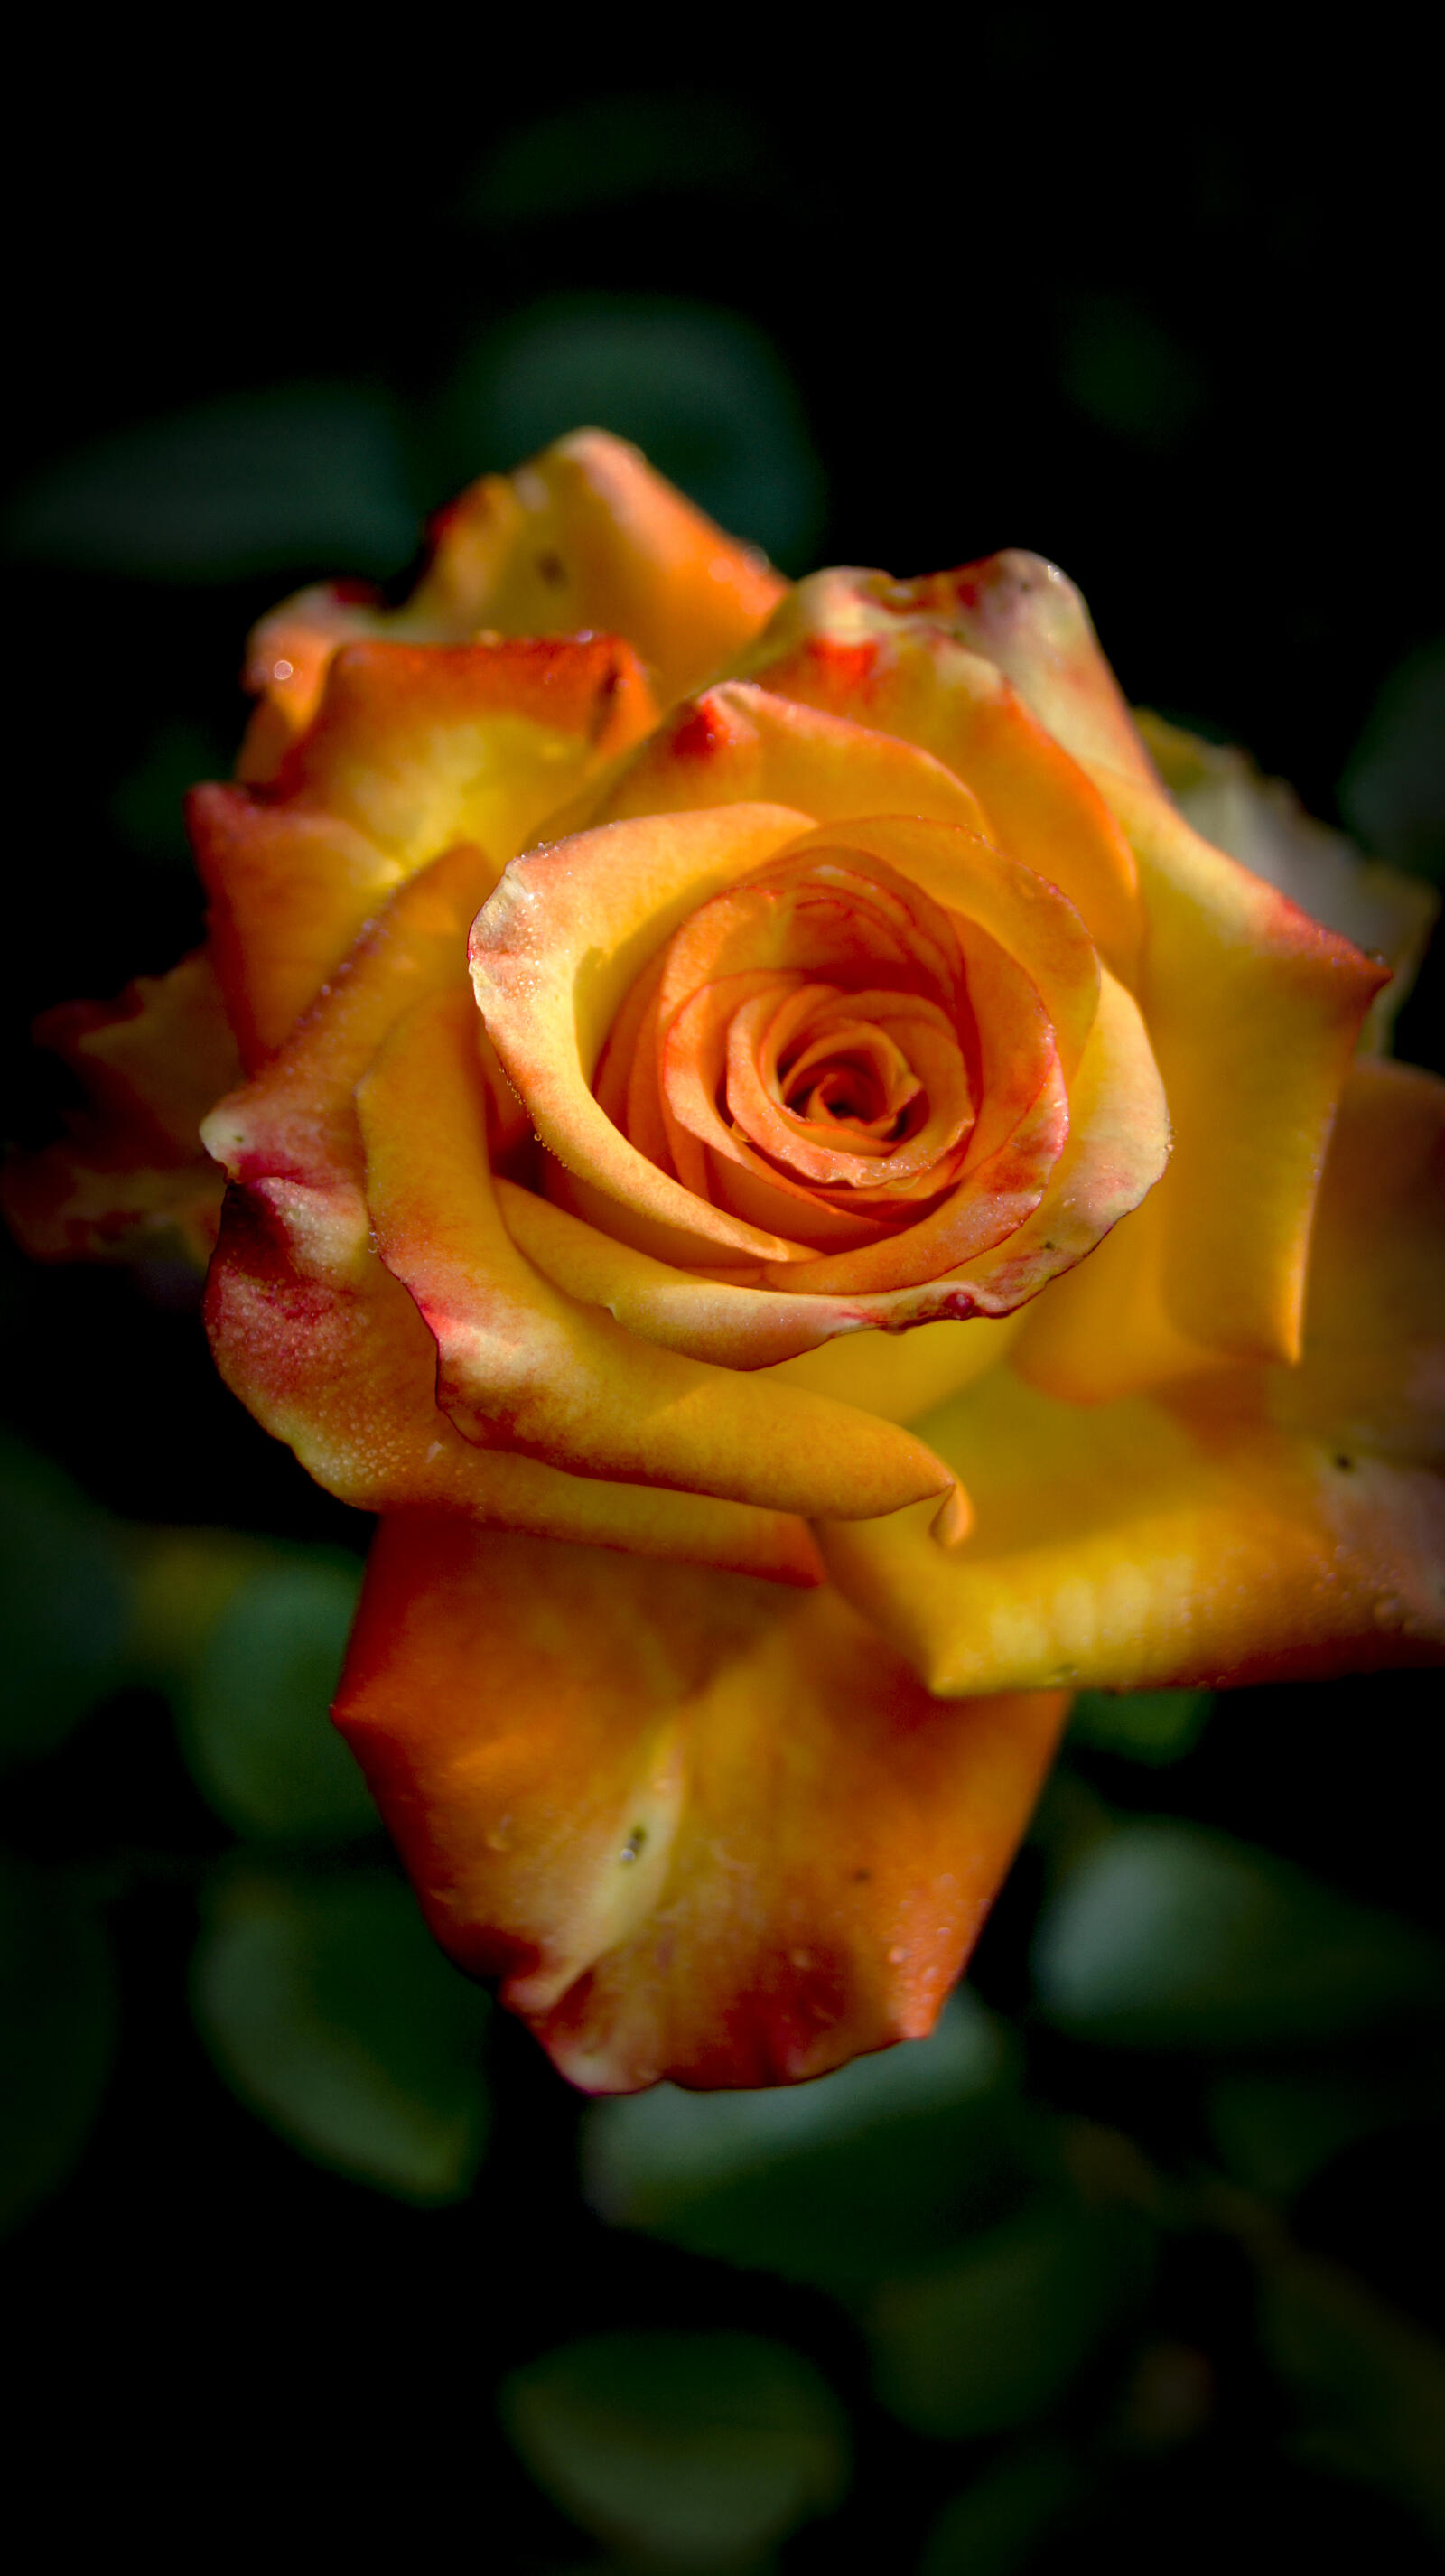 Free photo Rose.Blossoming.Yellow-orange color.